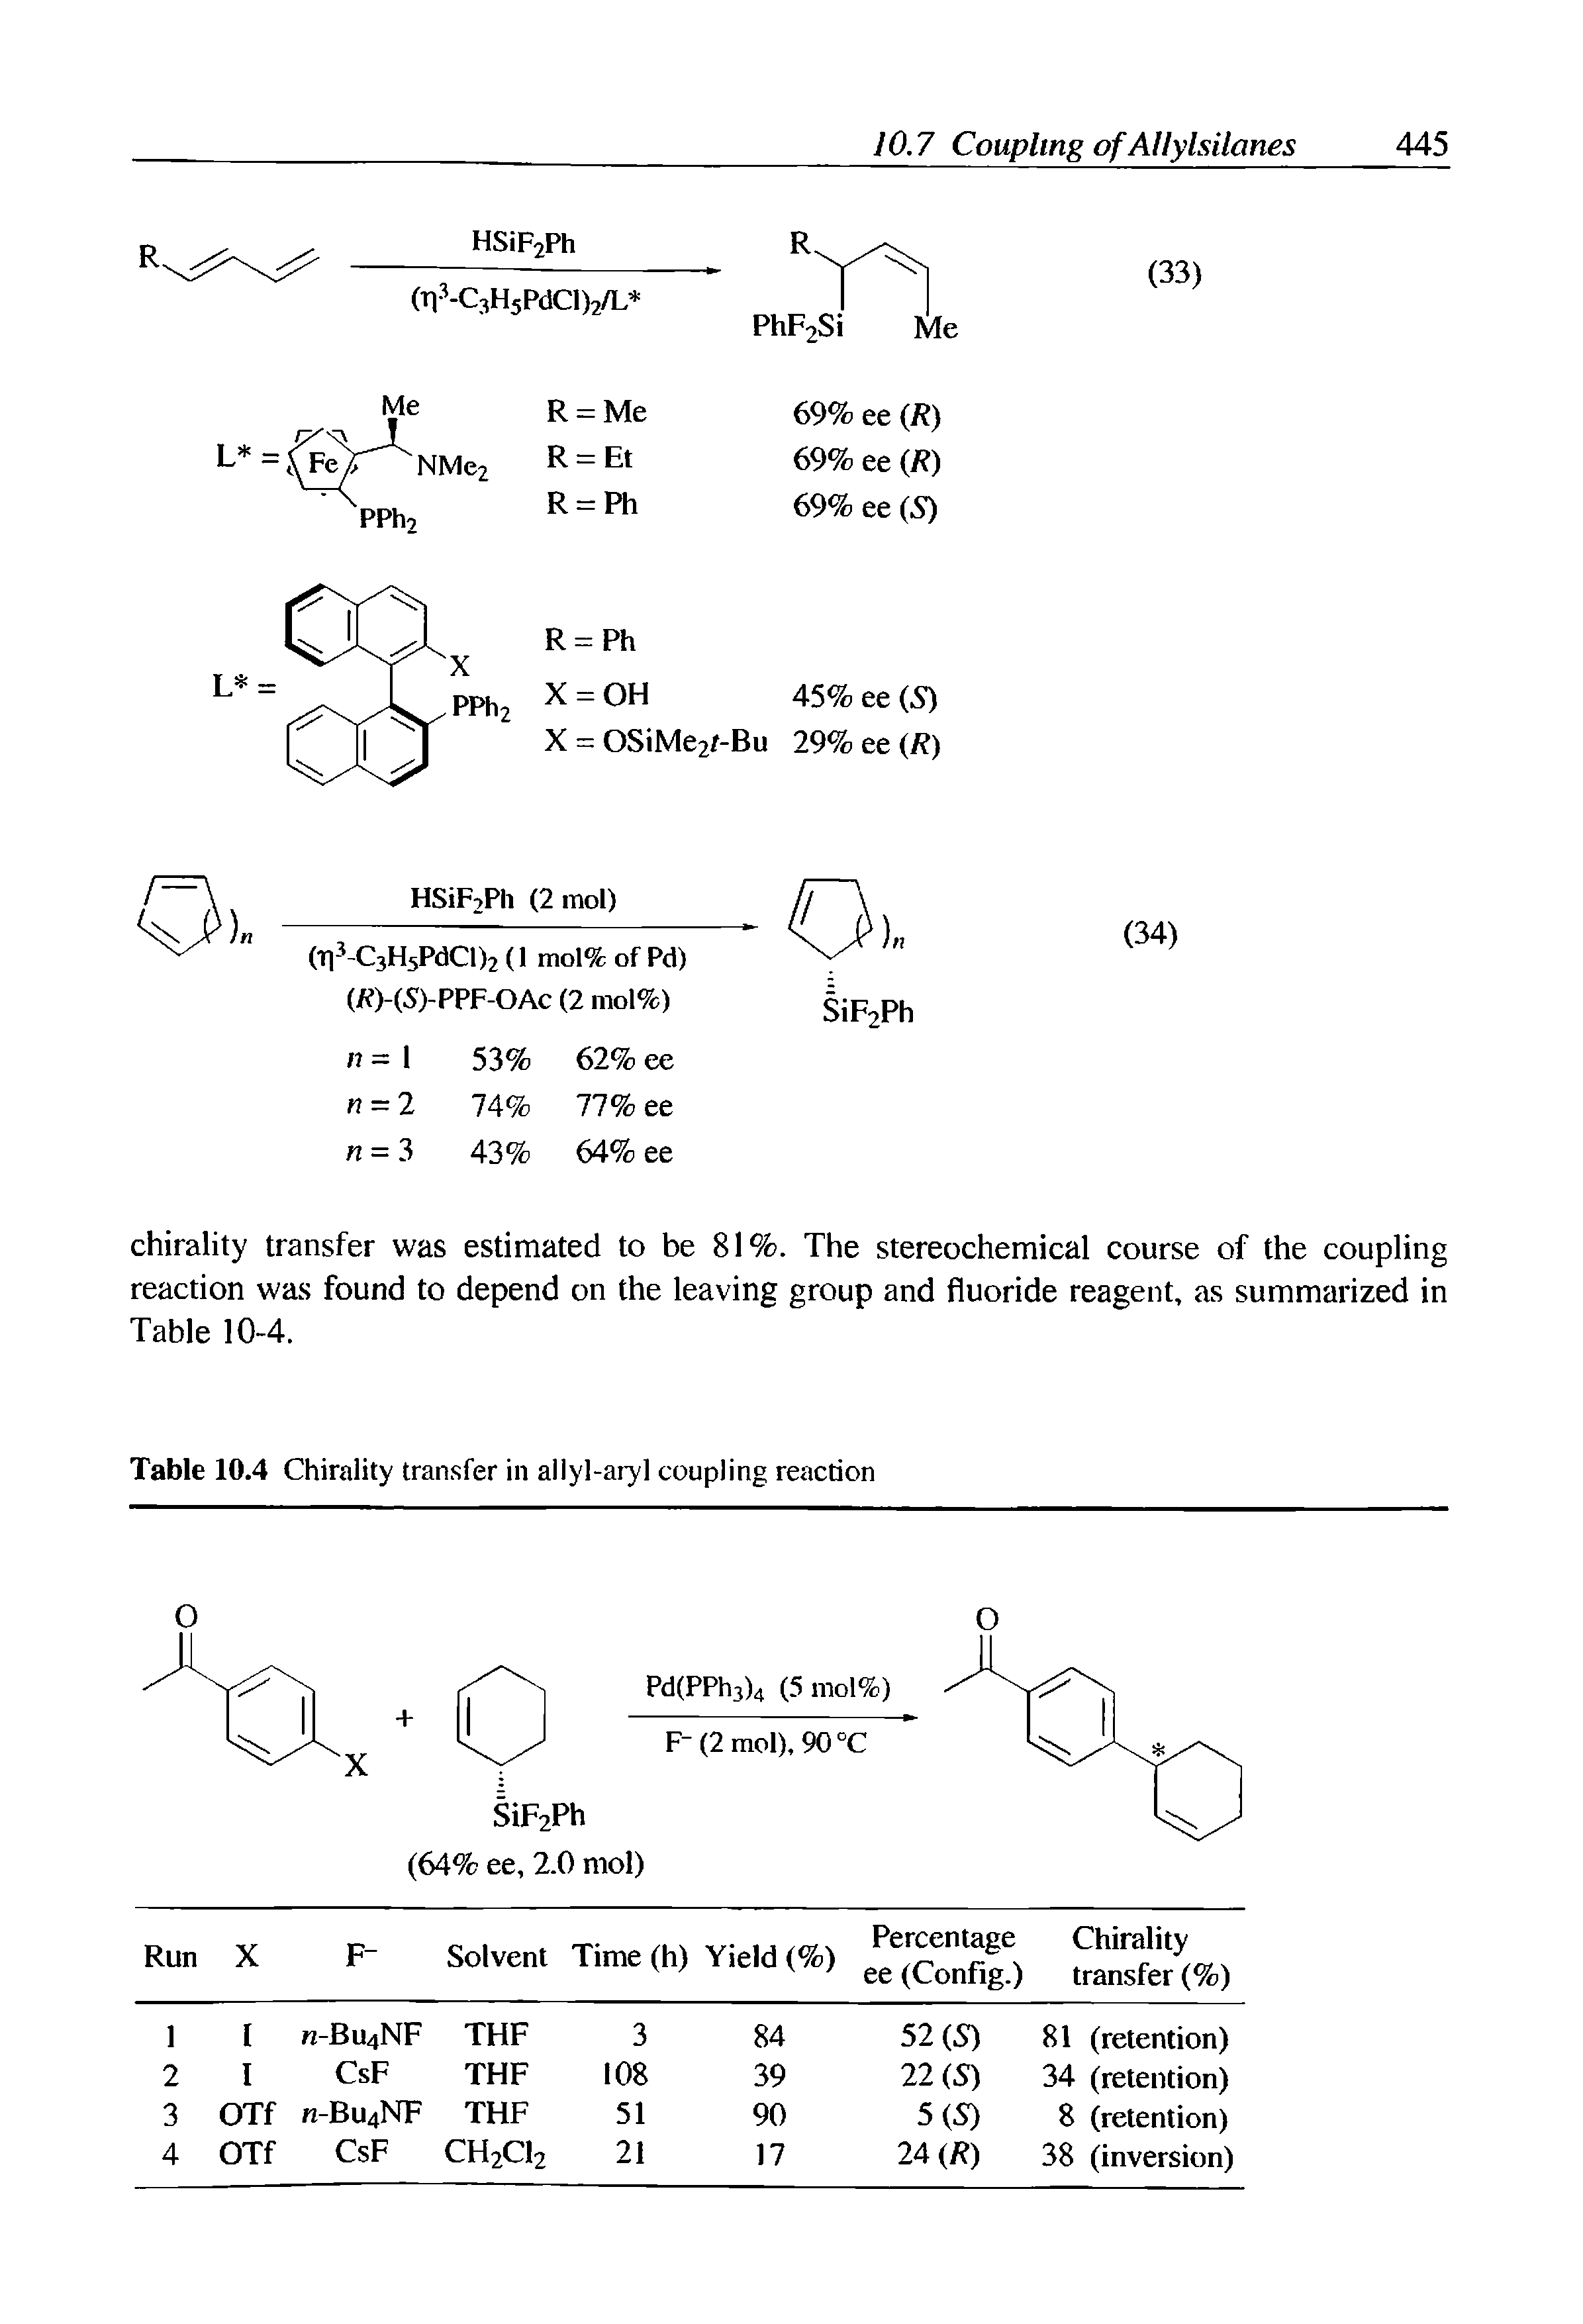 Table 10.4 Chirality transfer in allyl-aryl coupling reaction...